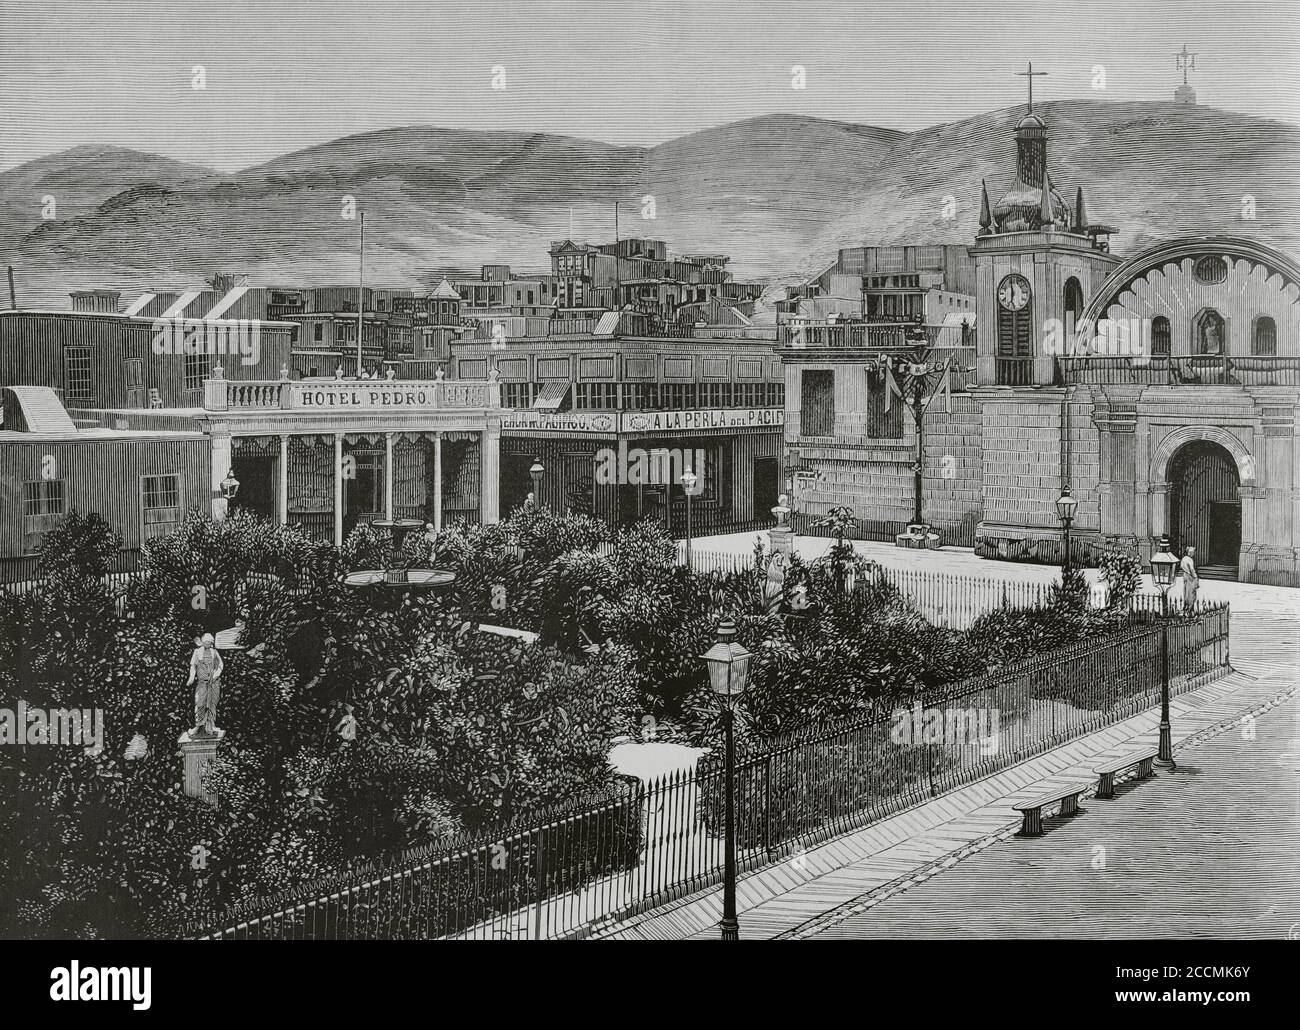 The War of the Pacific or Saltpetre War. Armed conflict that pitted Chile against the allies of Bolivia and Peru (1879-1883). Peru, Chorrillos. View of the town's main square, before the battle of January 13, 1881. Chorrillos was a district of the Lima province, part of the city of Lima. It served as a luxury beach resort until it was almost totally destroyed by Chilean troops during the War of the Pacific. Engraving. La Ilustracion Española y Americana, 1881. Stock Photo